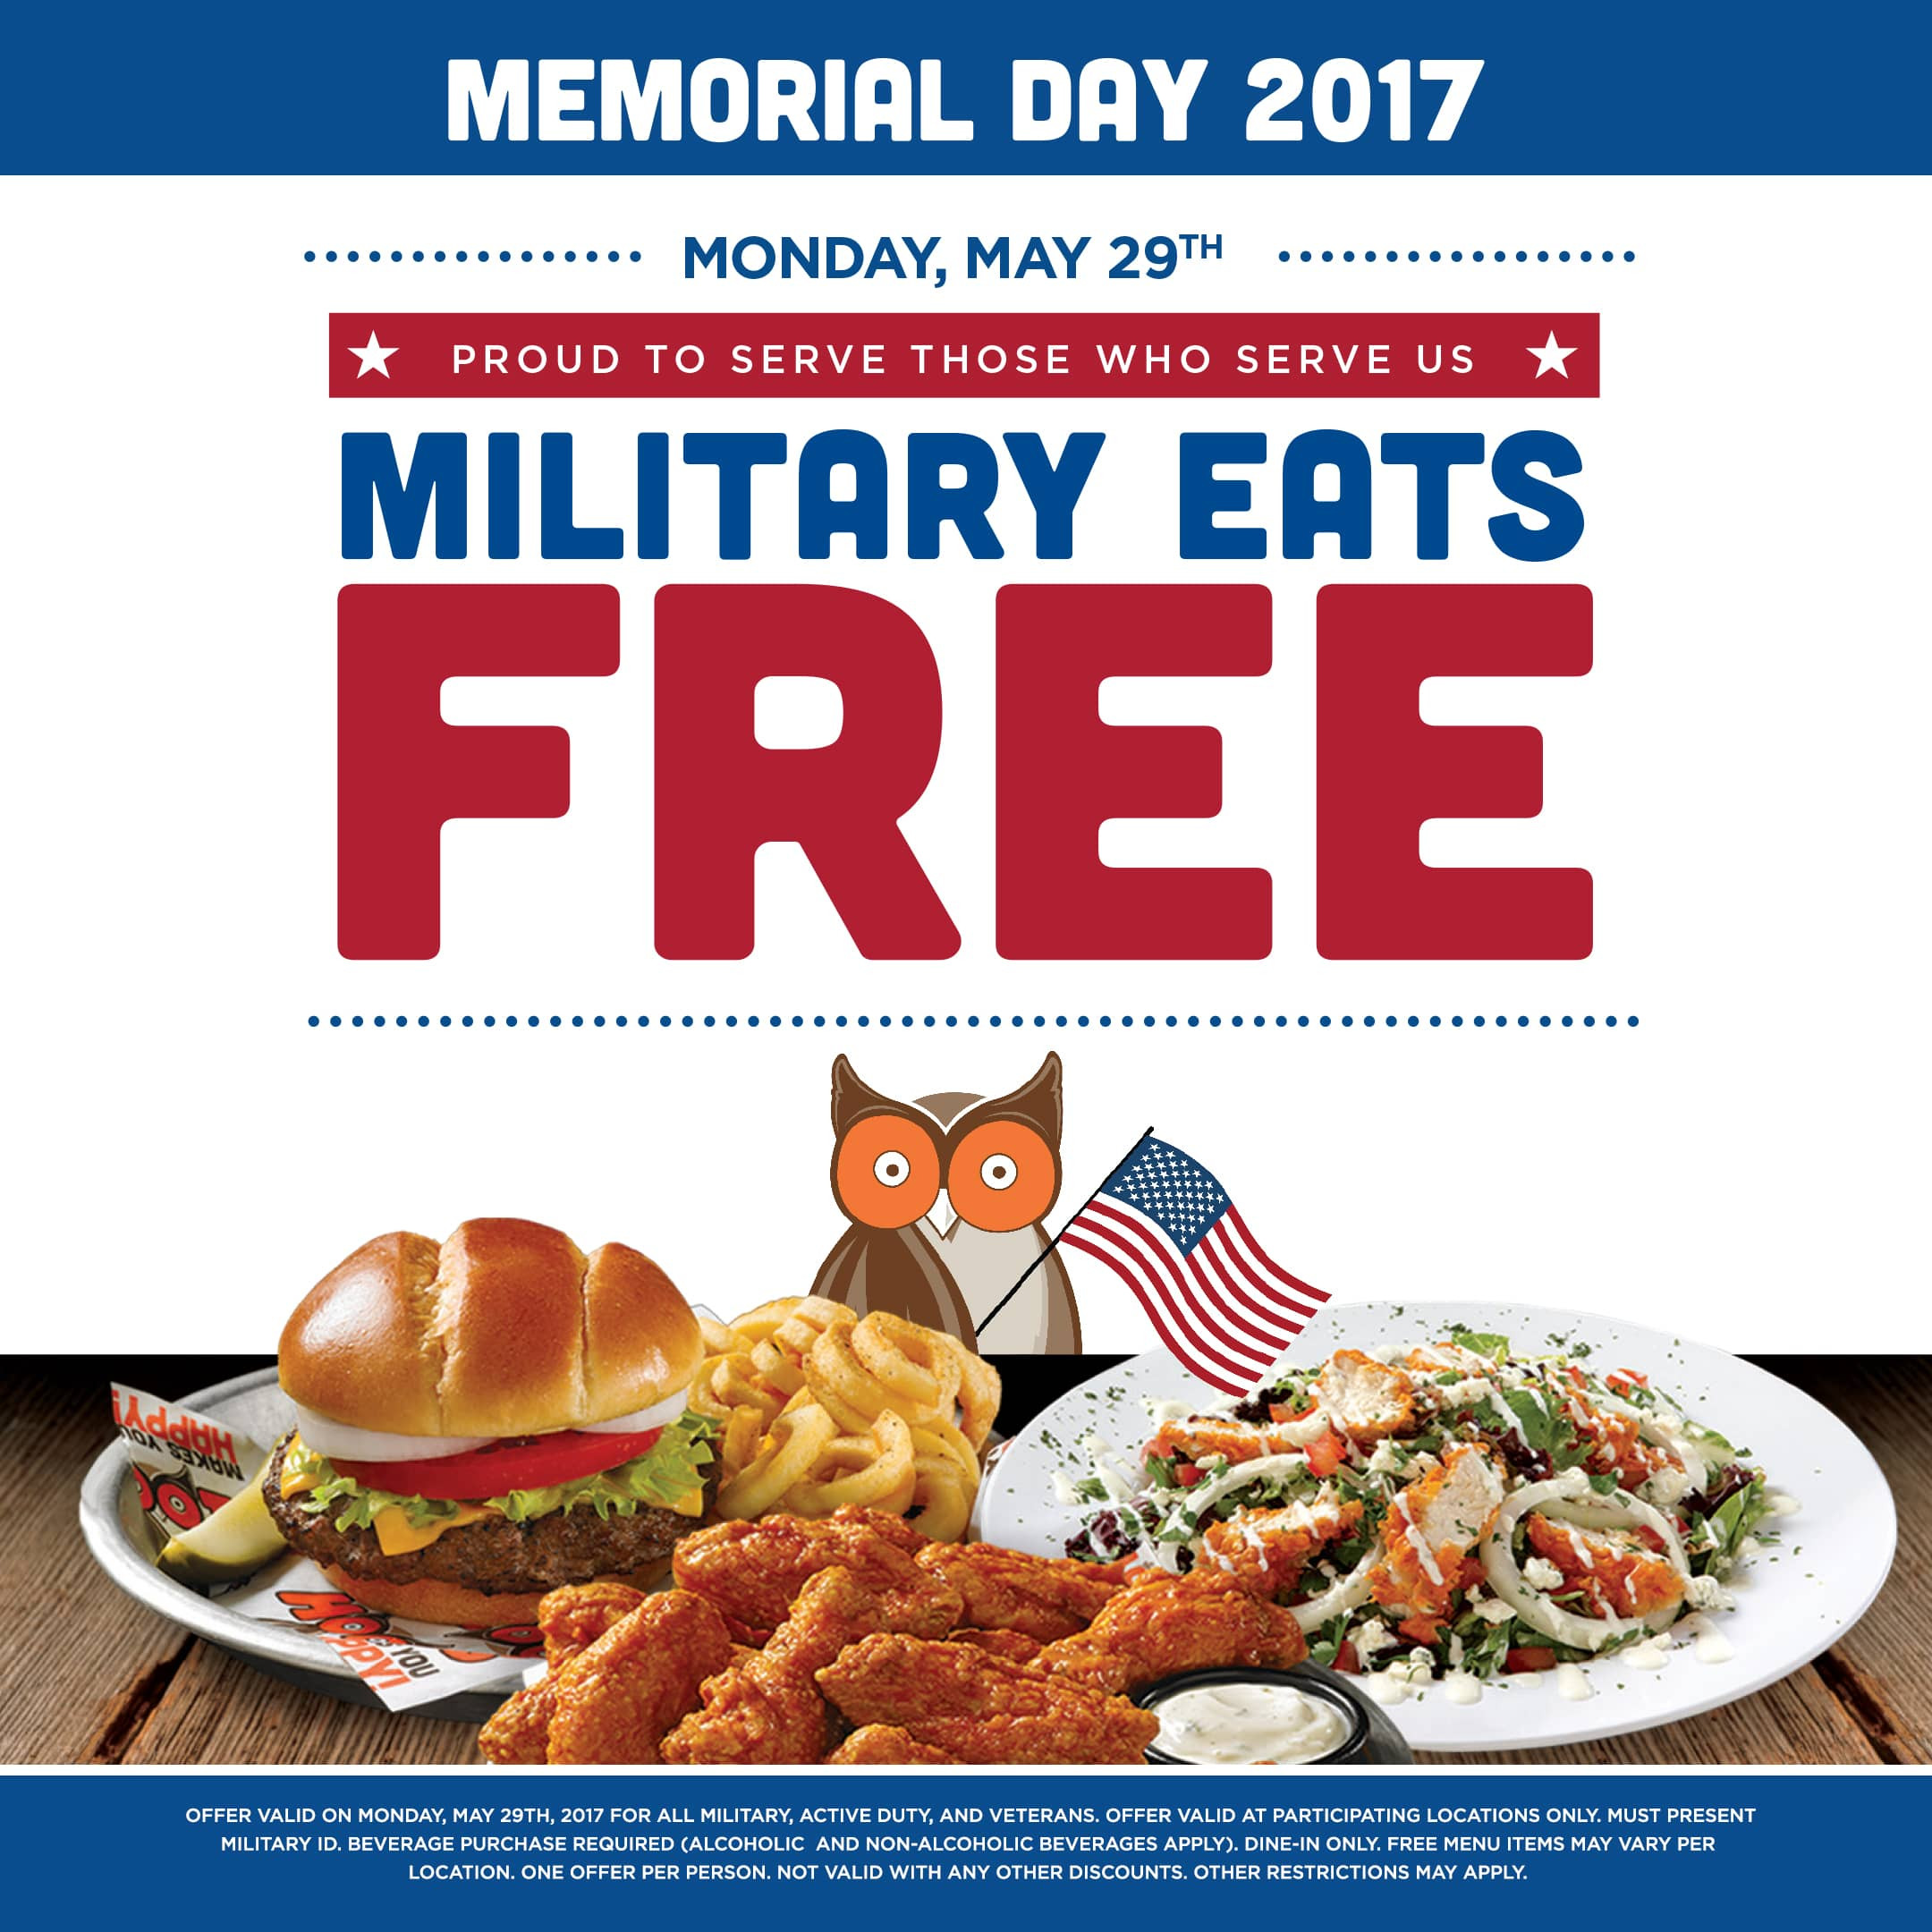 Free Food For Veterans On Memorial Day
 Hooters Serves Free Meals to Military on Memorial Day